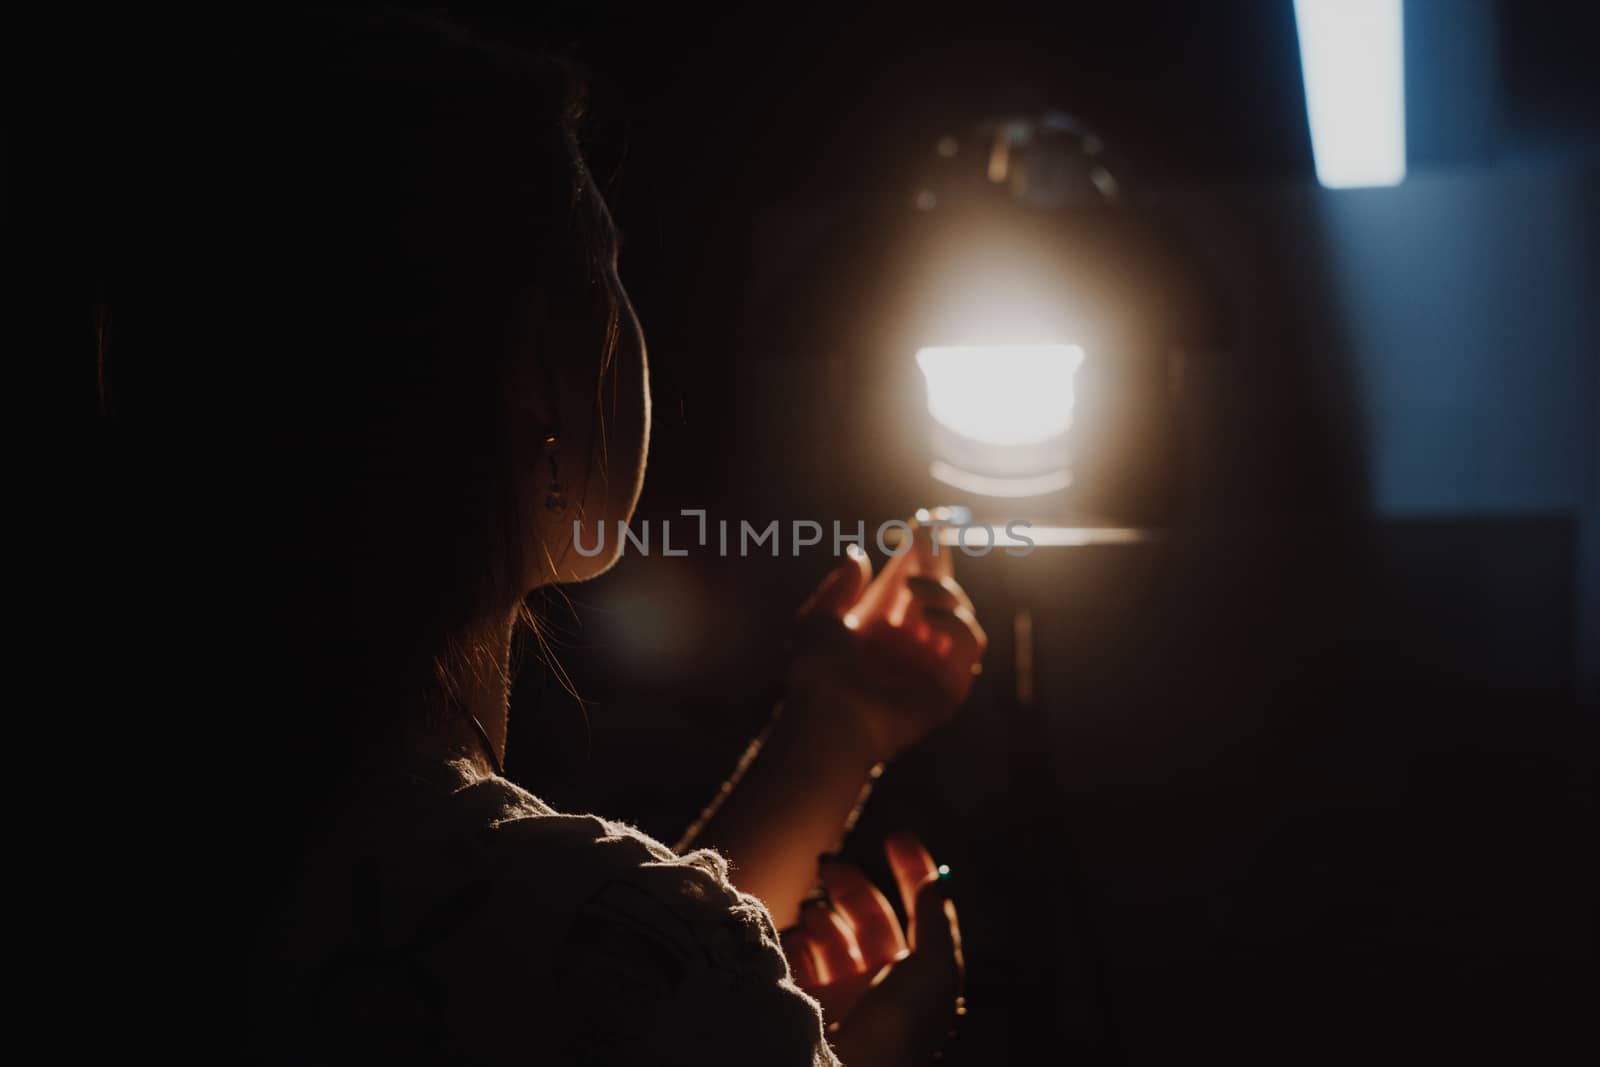 girl reaching for the light of the lantern, wooman in a dark room. illuminated hands with spotlight